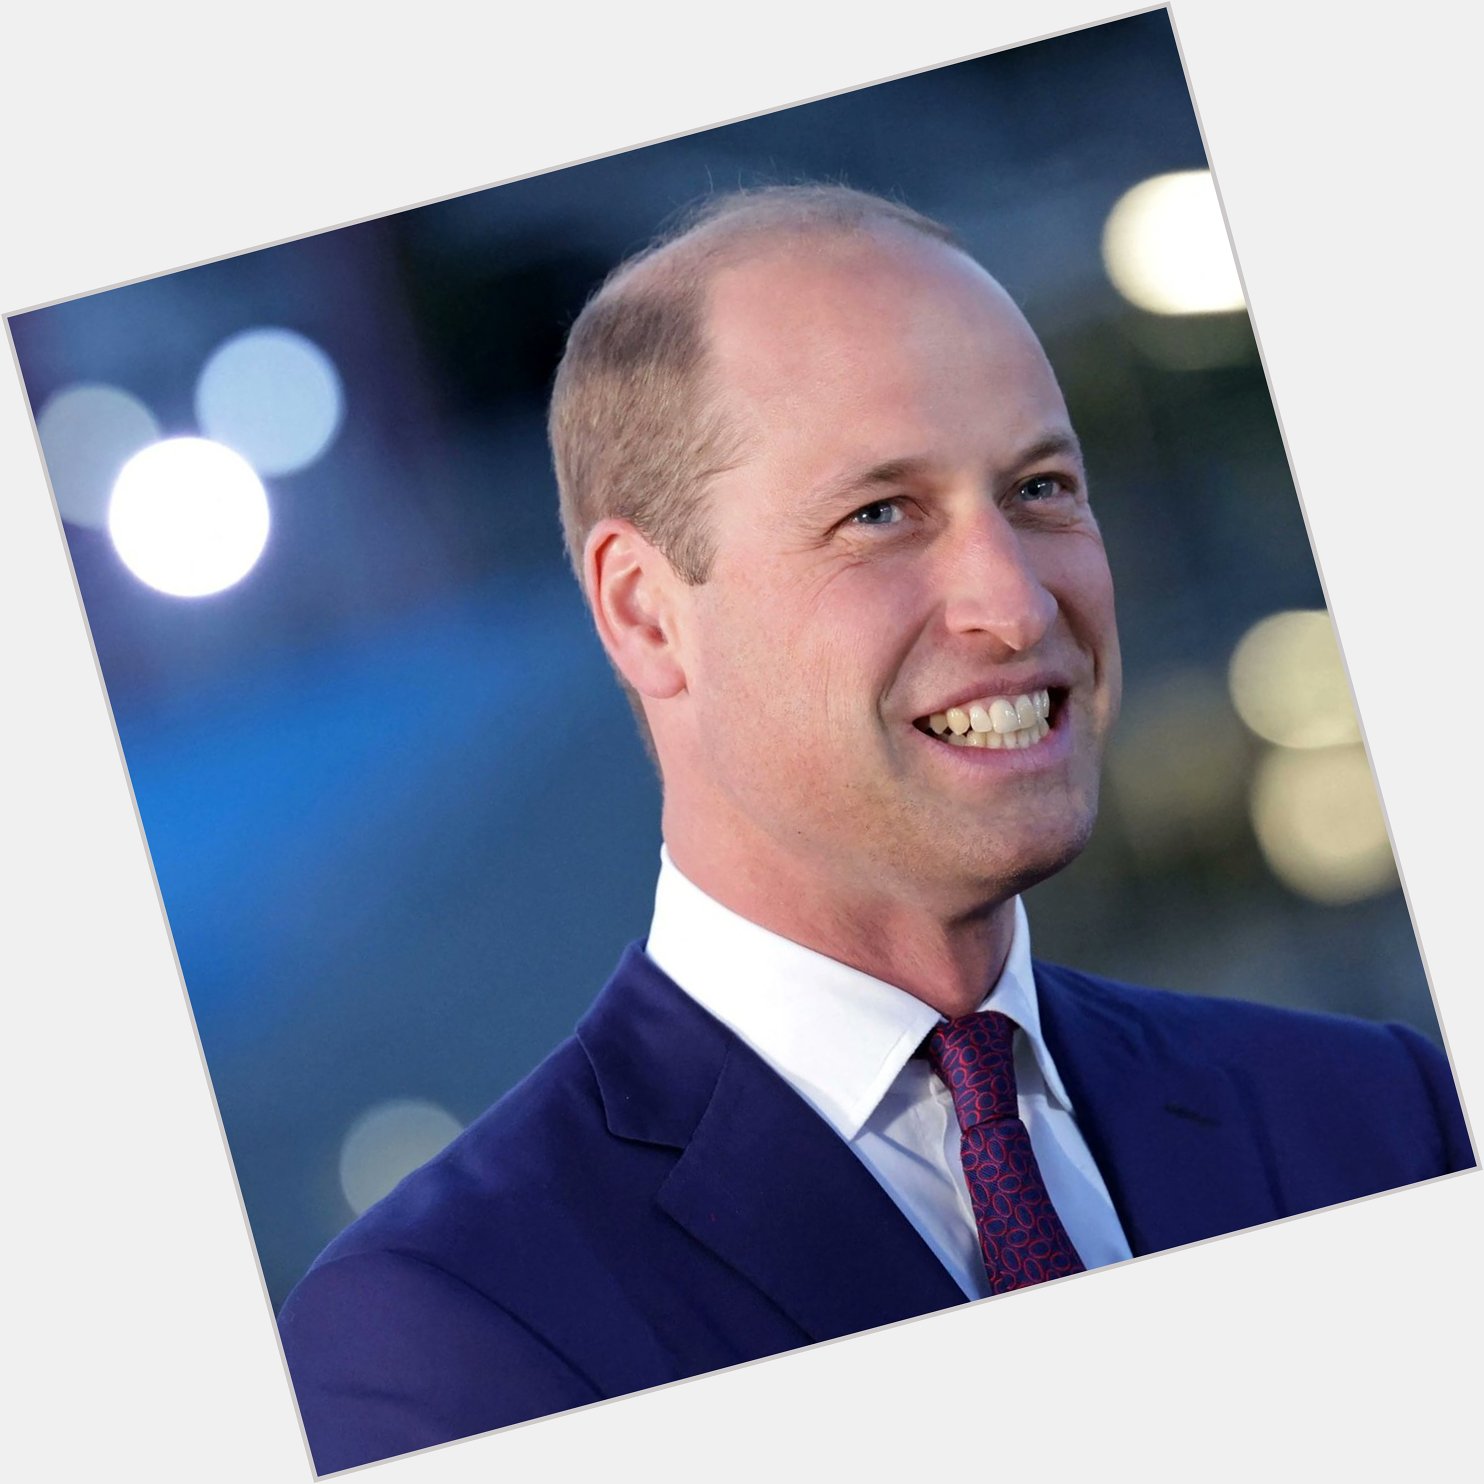 We would like to wish Prince William, the Duke of Cambridge, a happy 40th birthday! 